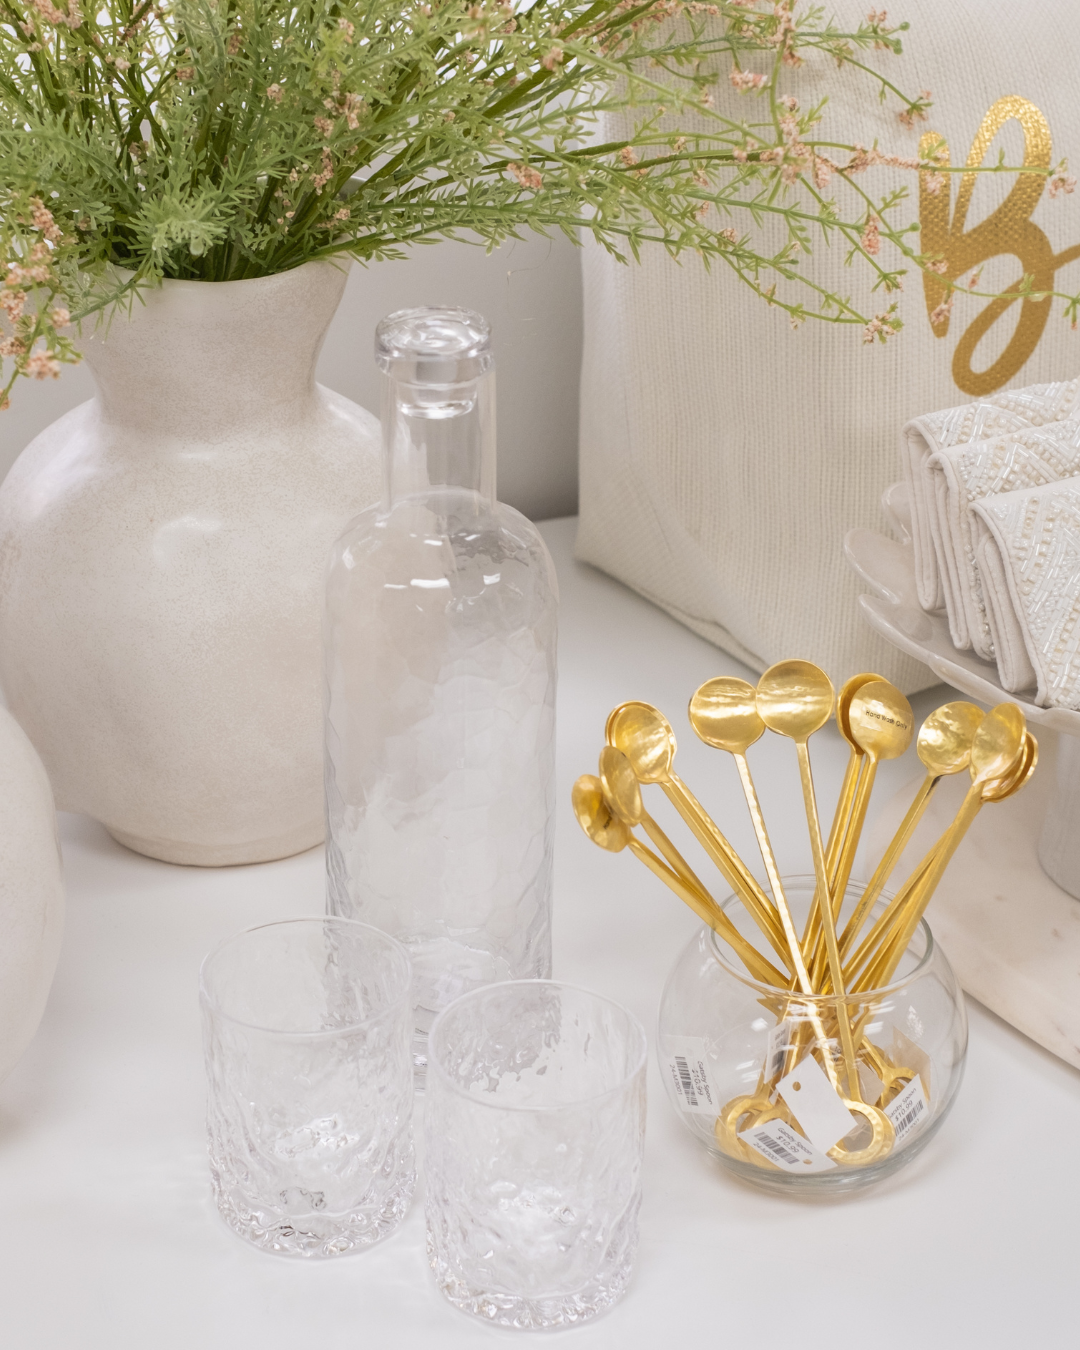 Gatsby Hammered Gold Stainless Steel Cocktail Stirring Spoon displayed with Alon Decanter and Tumbler Glasses